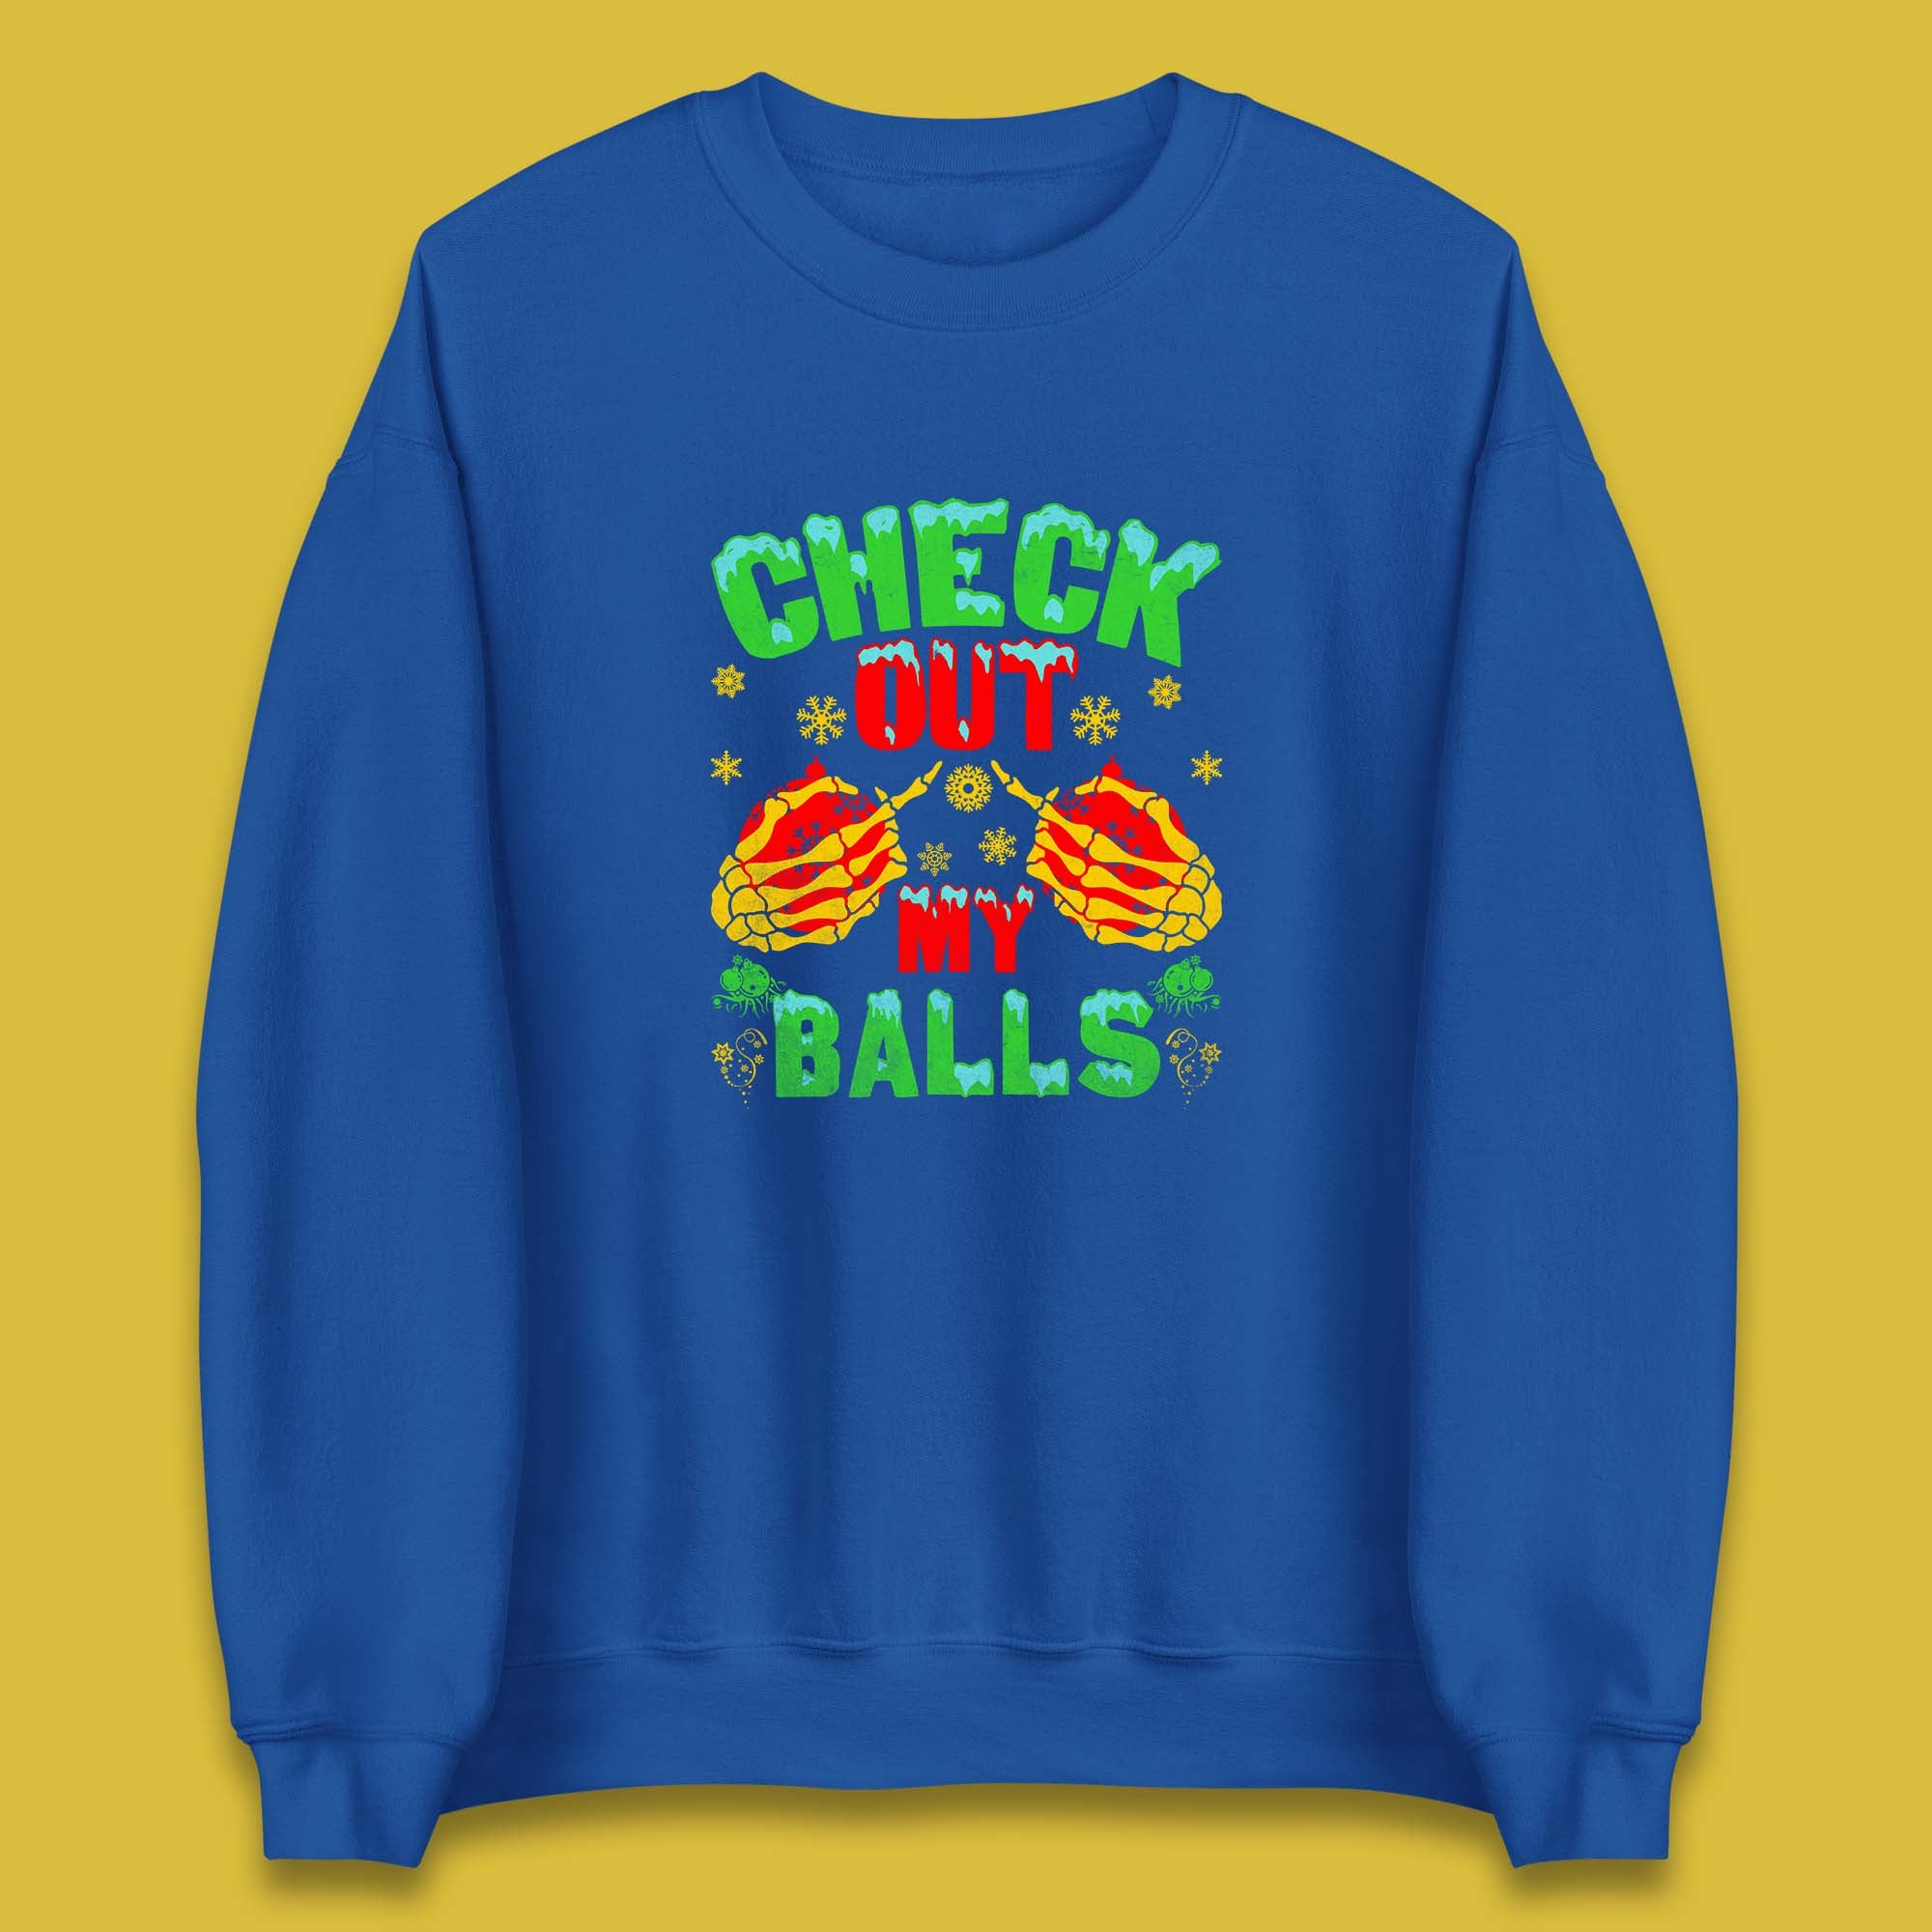 Check Out My Balls Christmas Skeleton Hands With Ornaments Funny Xmas Humor Unisex Sweatshirt